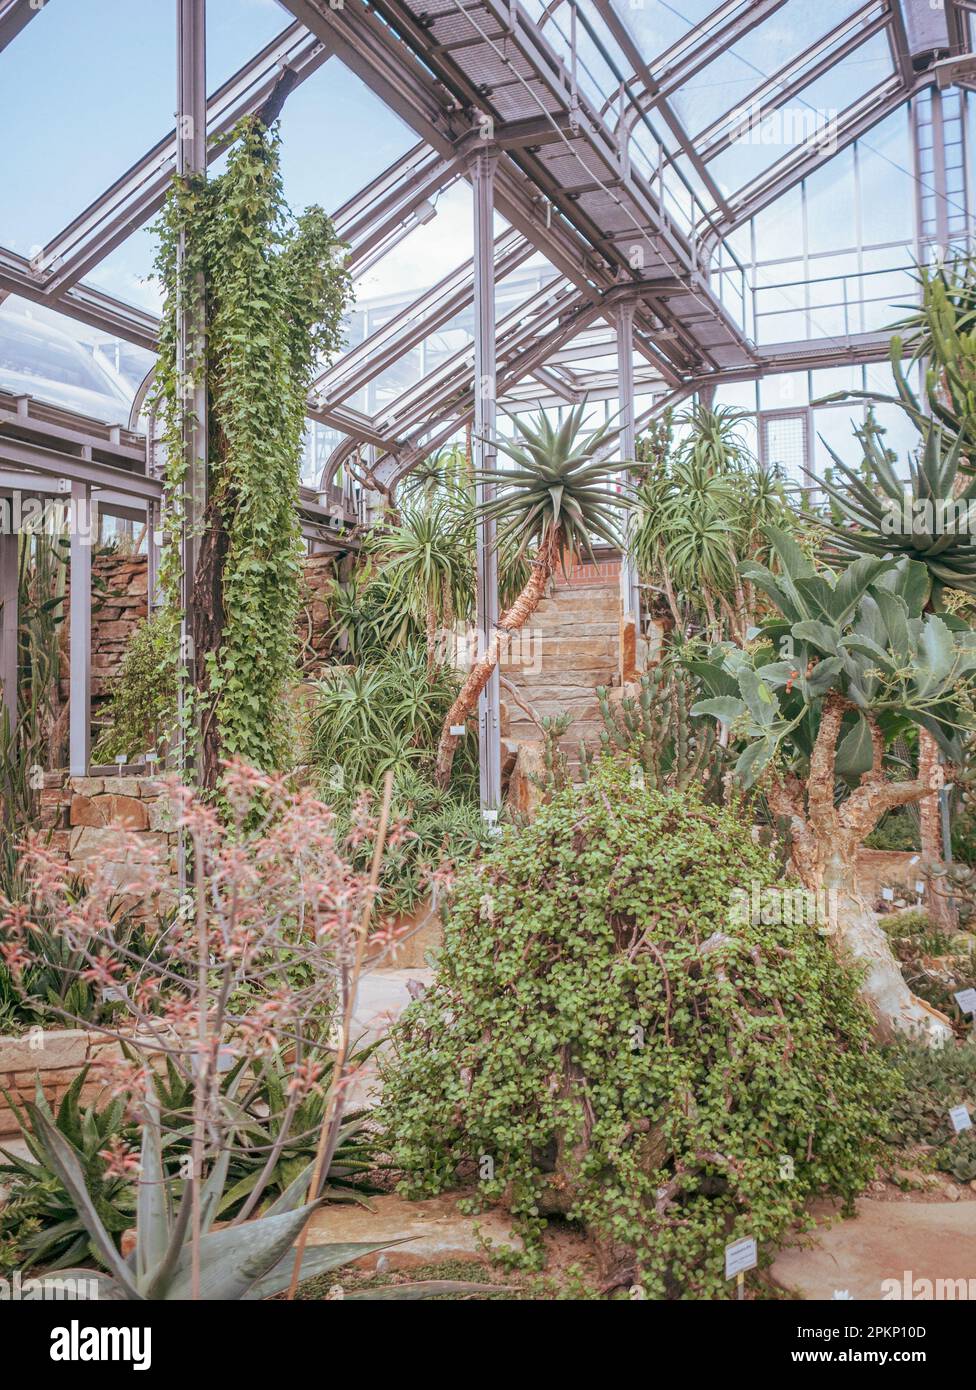 The cactus room in the greenhouse in Dahlem Stock Photo